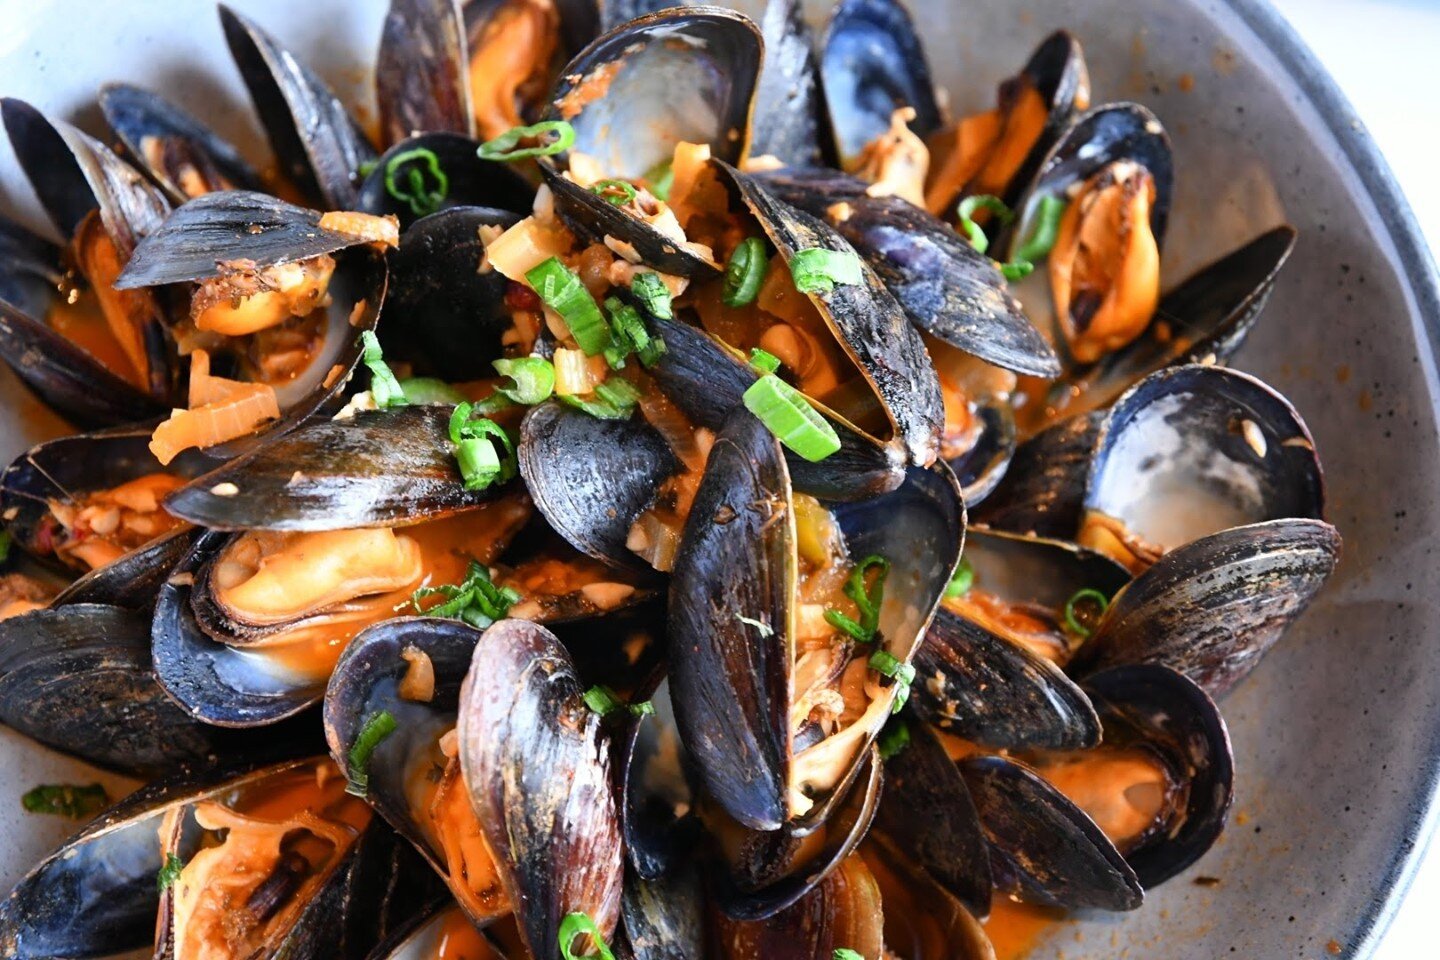 Look at those Mussels! 😍 💪 ⁠
⁠
⁠
⁠
#beautifulcuisines #freshseafood #besthappyhour #akronlifemag #montrose #huffpostetaste #forkyeah #foodporn #thefeedfeed #beautifulcuisines #foodgram #eatthis #hungry #yumyum #delicious #foodlovers #comfortfood #d